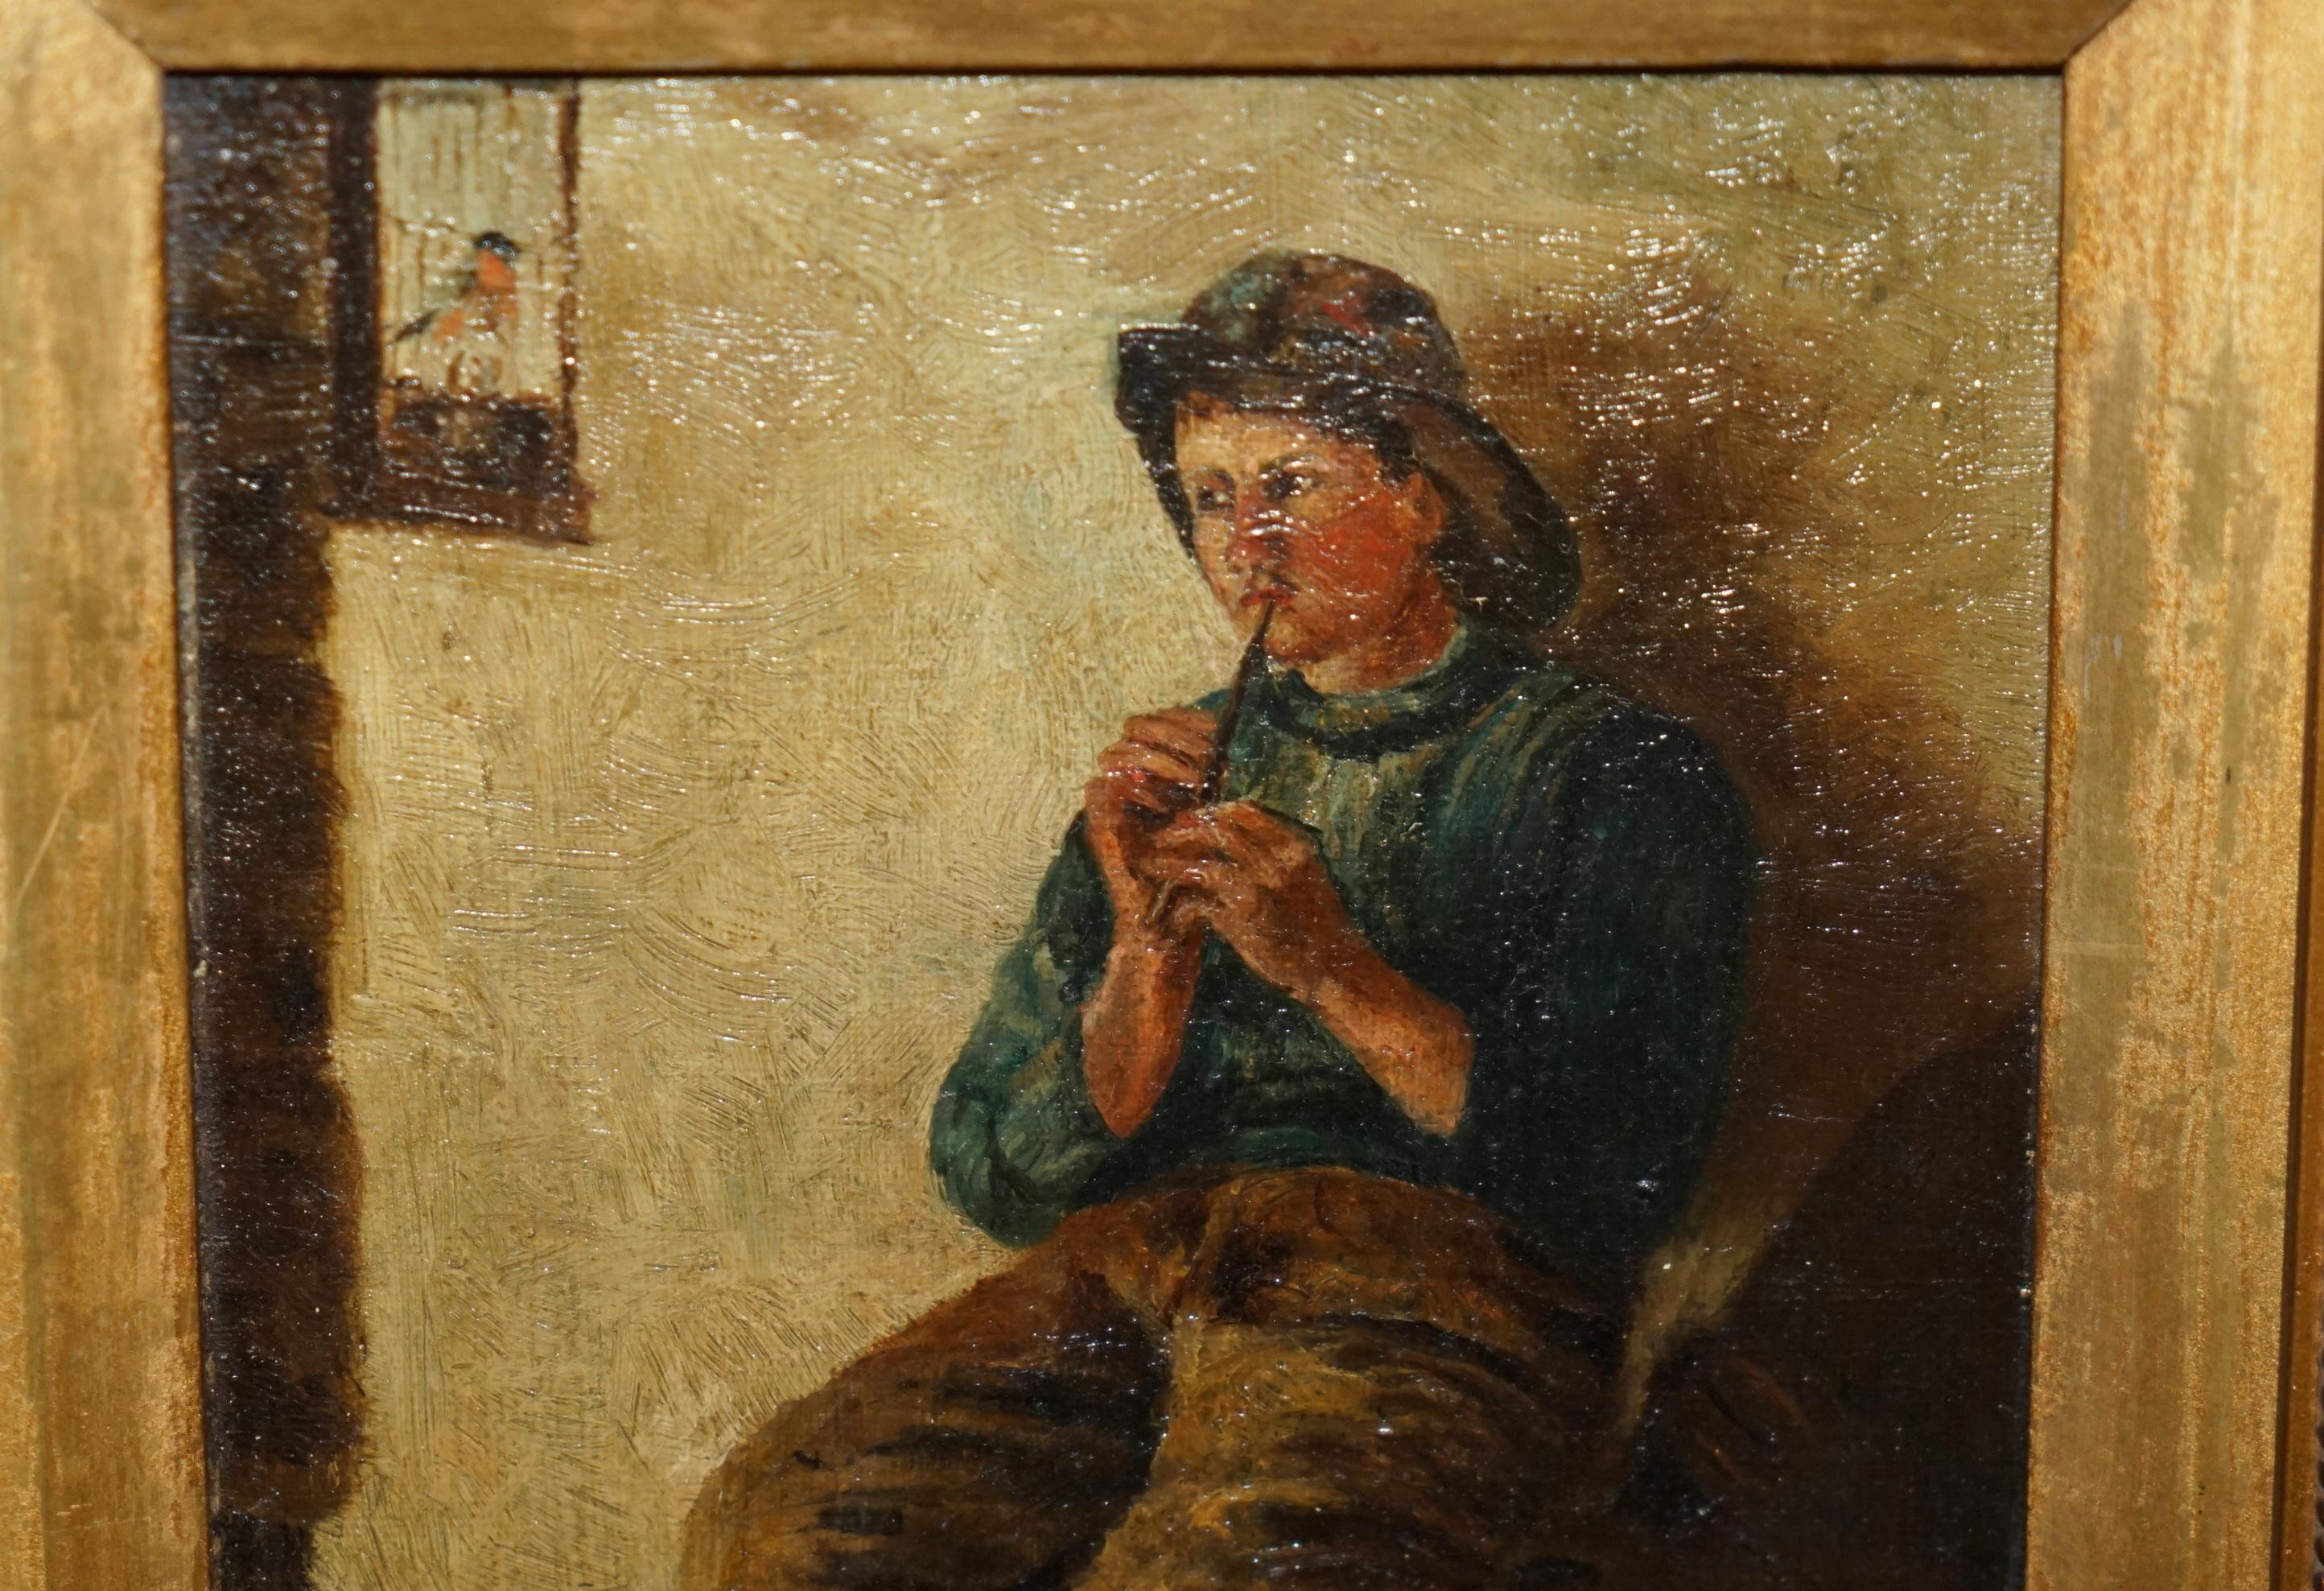 Hand-Painted SUBLIME ANTIQUE ViCTORIAN OIL PAINTING OF A YOUNG BOY (FISHERMAN) PLAYING A PIPE For Sale